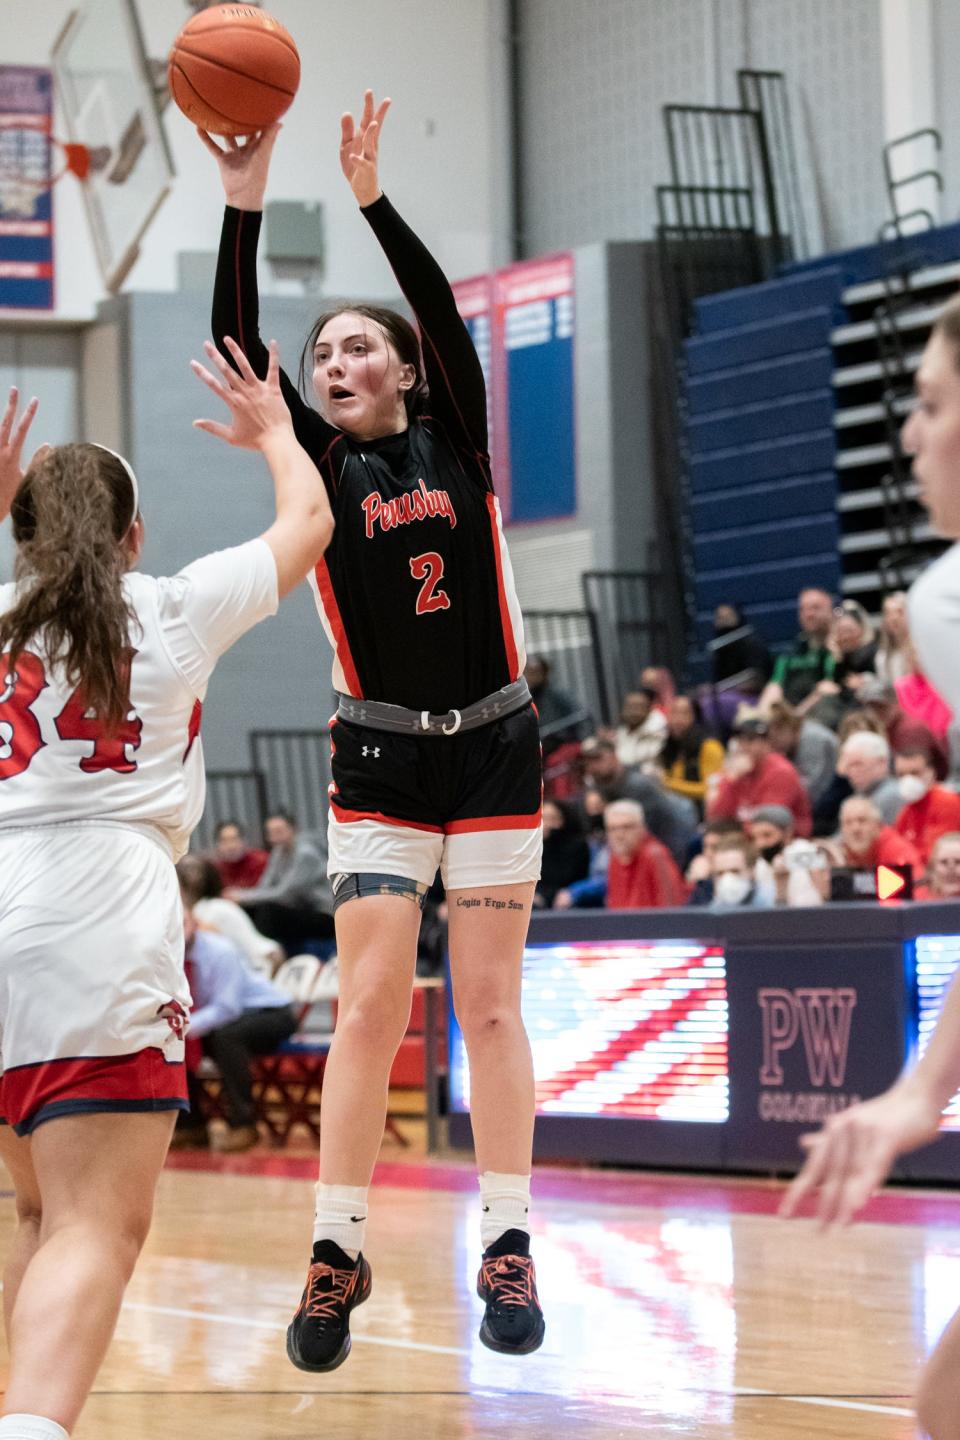 Ava Sciolla won the PIAA Class 6A Player of the Year award during her senior season at Pennsbury. Now at the University of Maryland, Ava will be returning home to host the 'Playing for Joey' basketball clinic on Aug. 16, 2022.